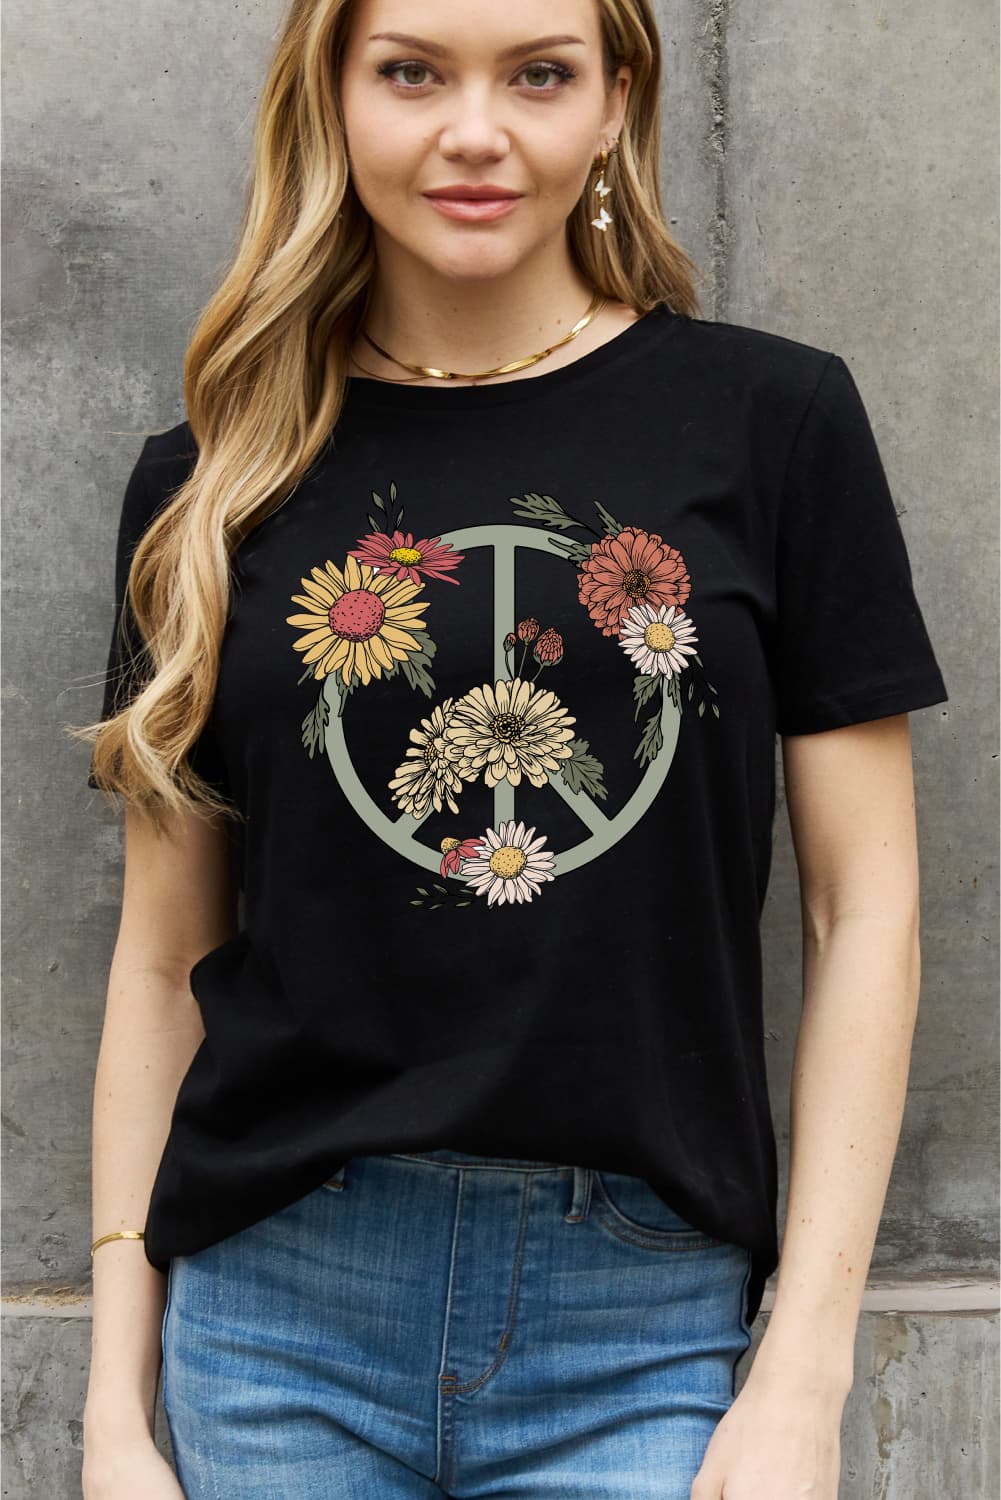 Simply Love Full Size Flower Graphic Cotton Tee BLUE ZONE PLANET